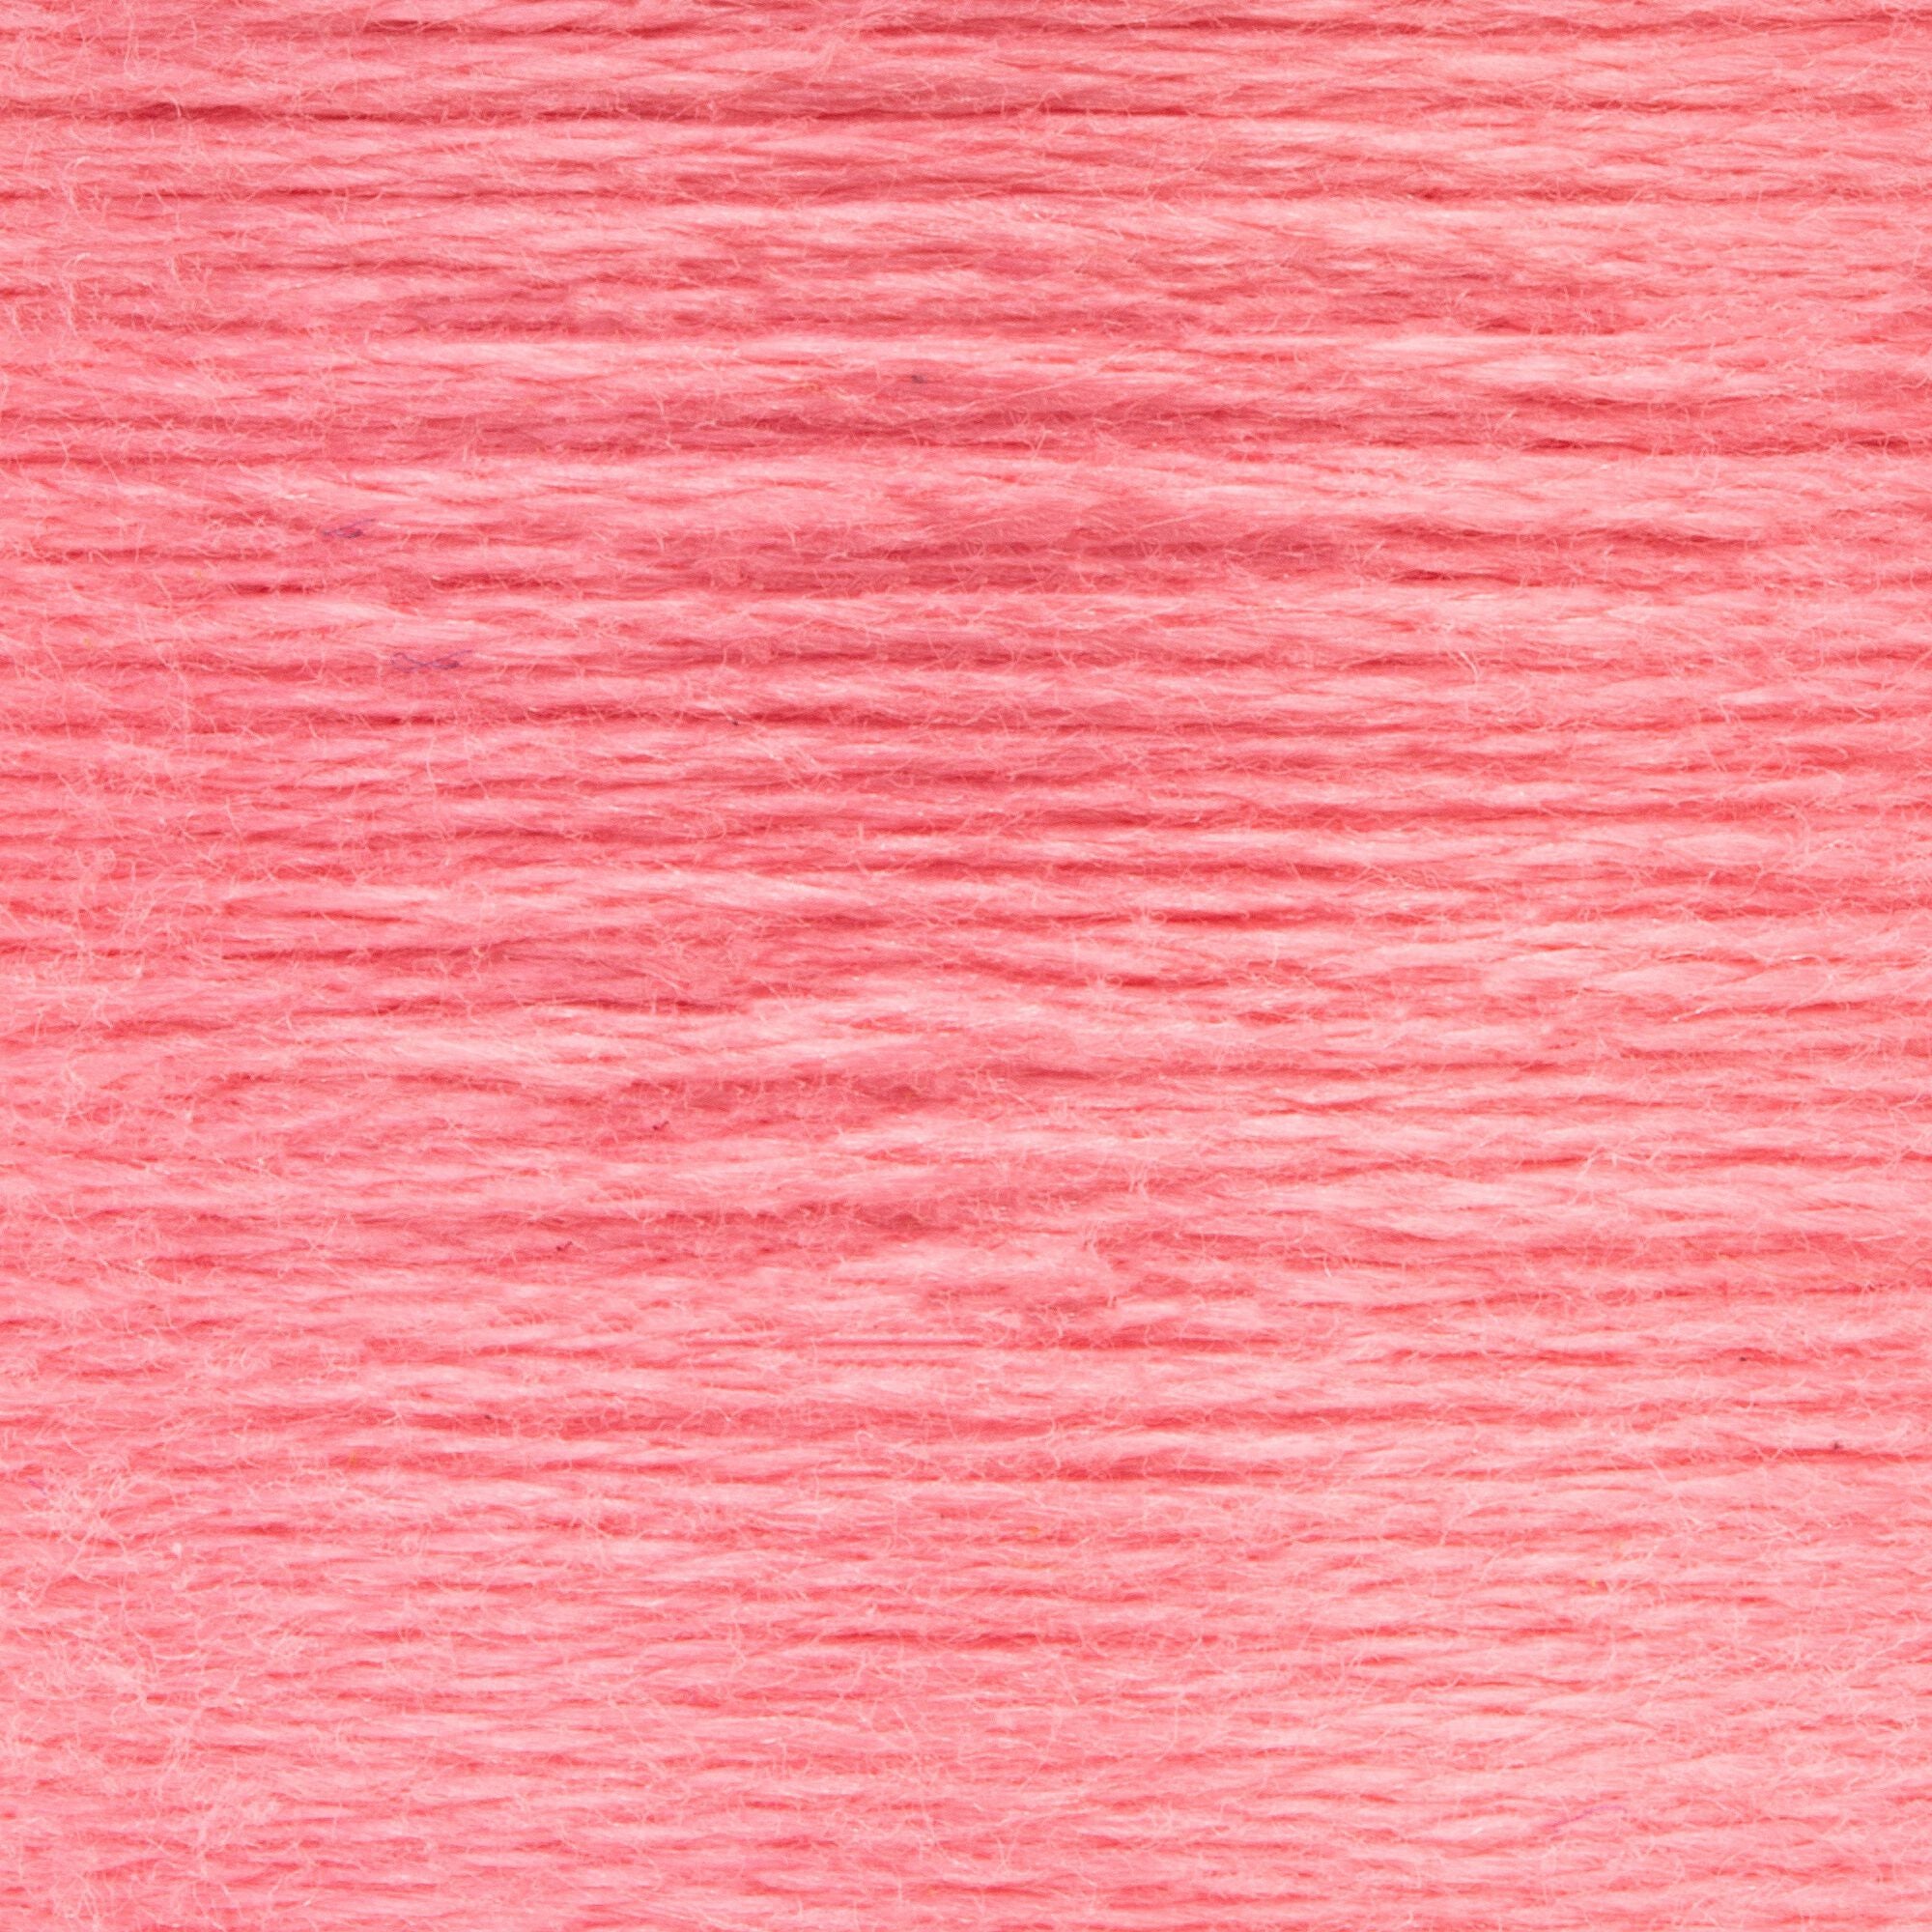 Anchor Embroidery Floss in Carnation Med Lt